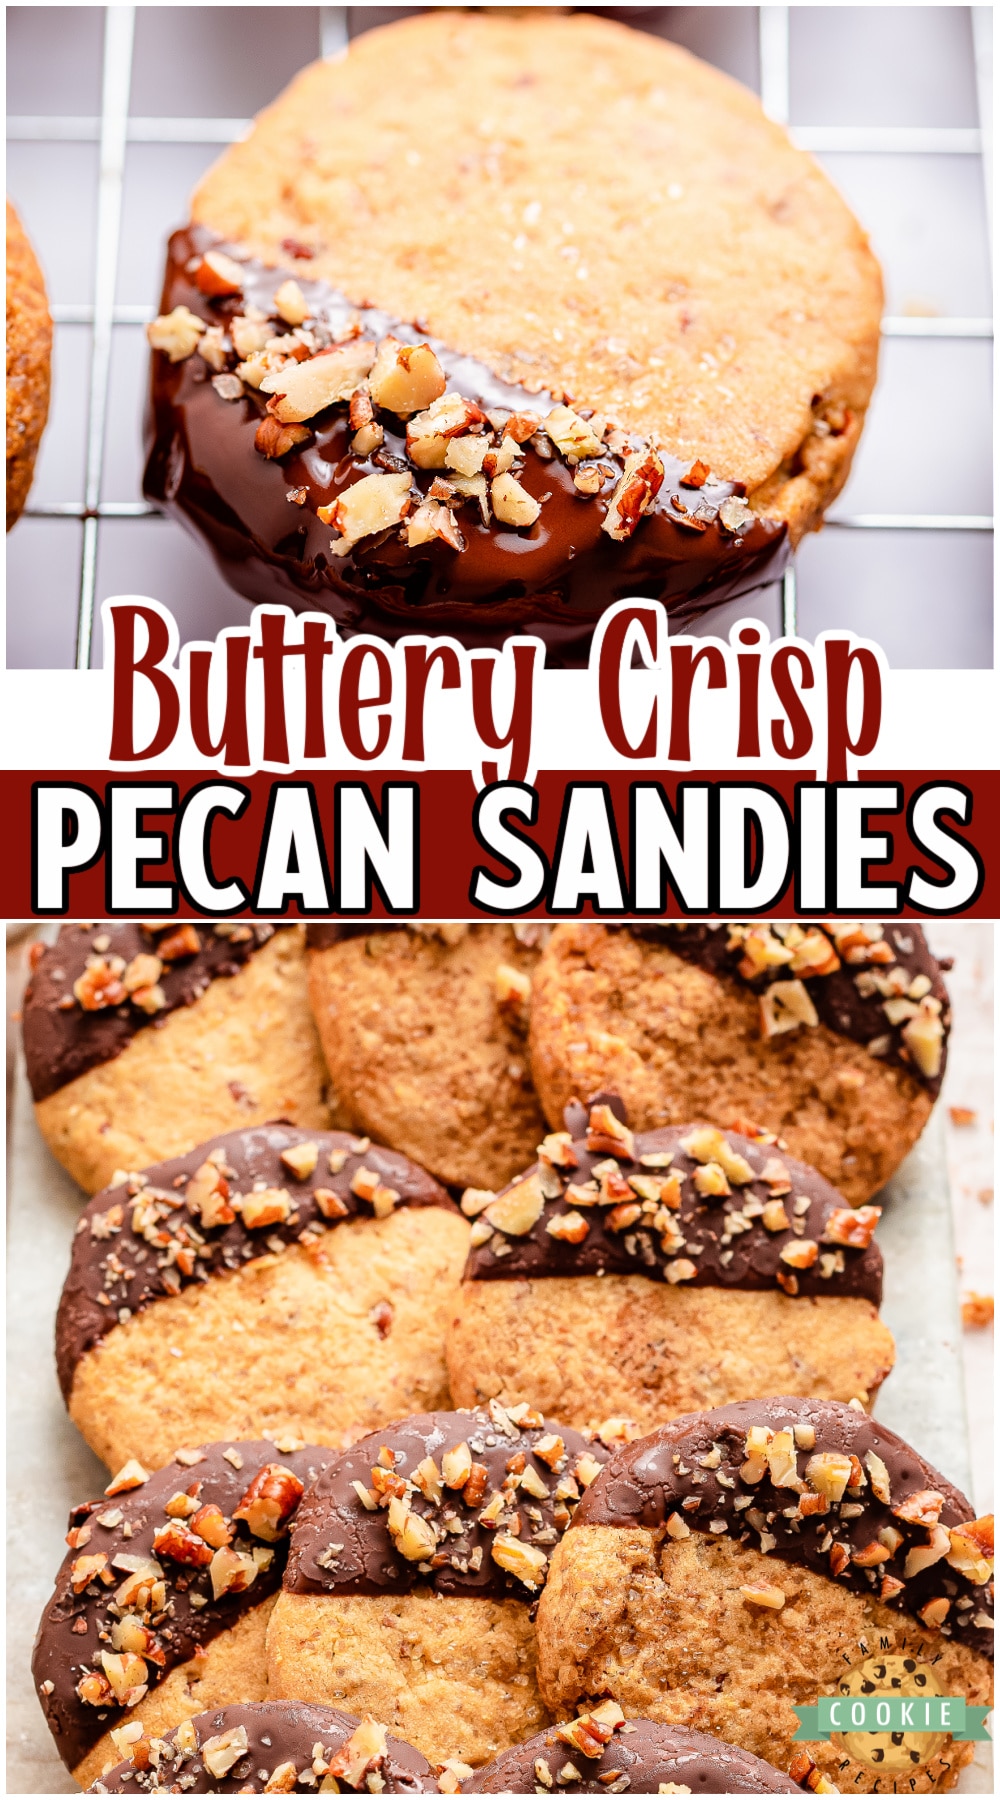 Pecan Sandies are a tender, buttery cookie flavored with cinnamon, vanilla and plenty of pecans! Pecan cookies dipped in dark chocolate and sprinkled with chopped pecans for the ultimate cookie!